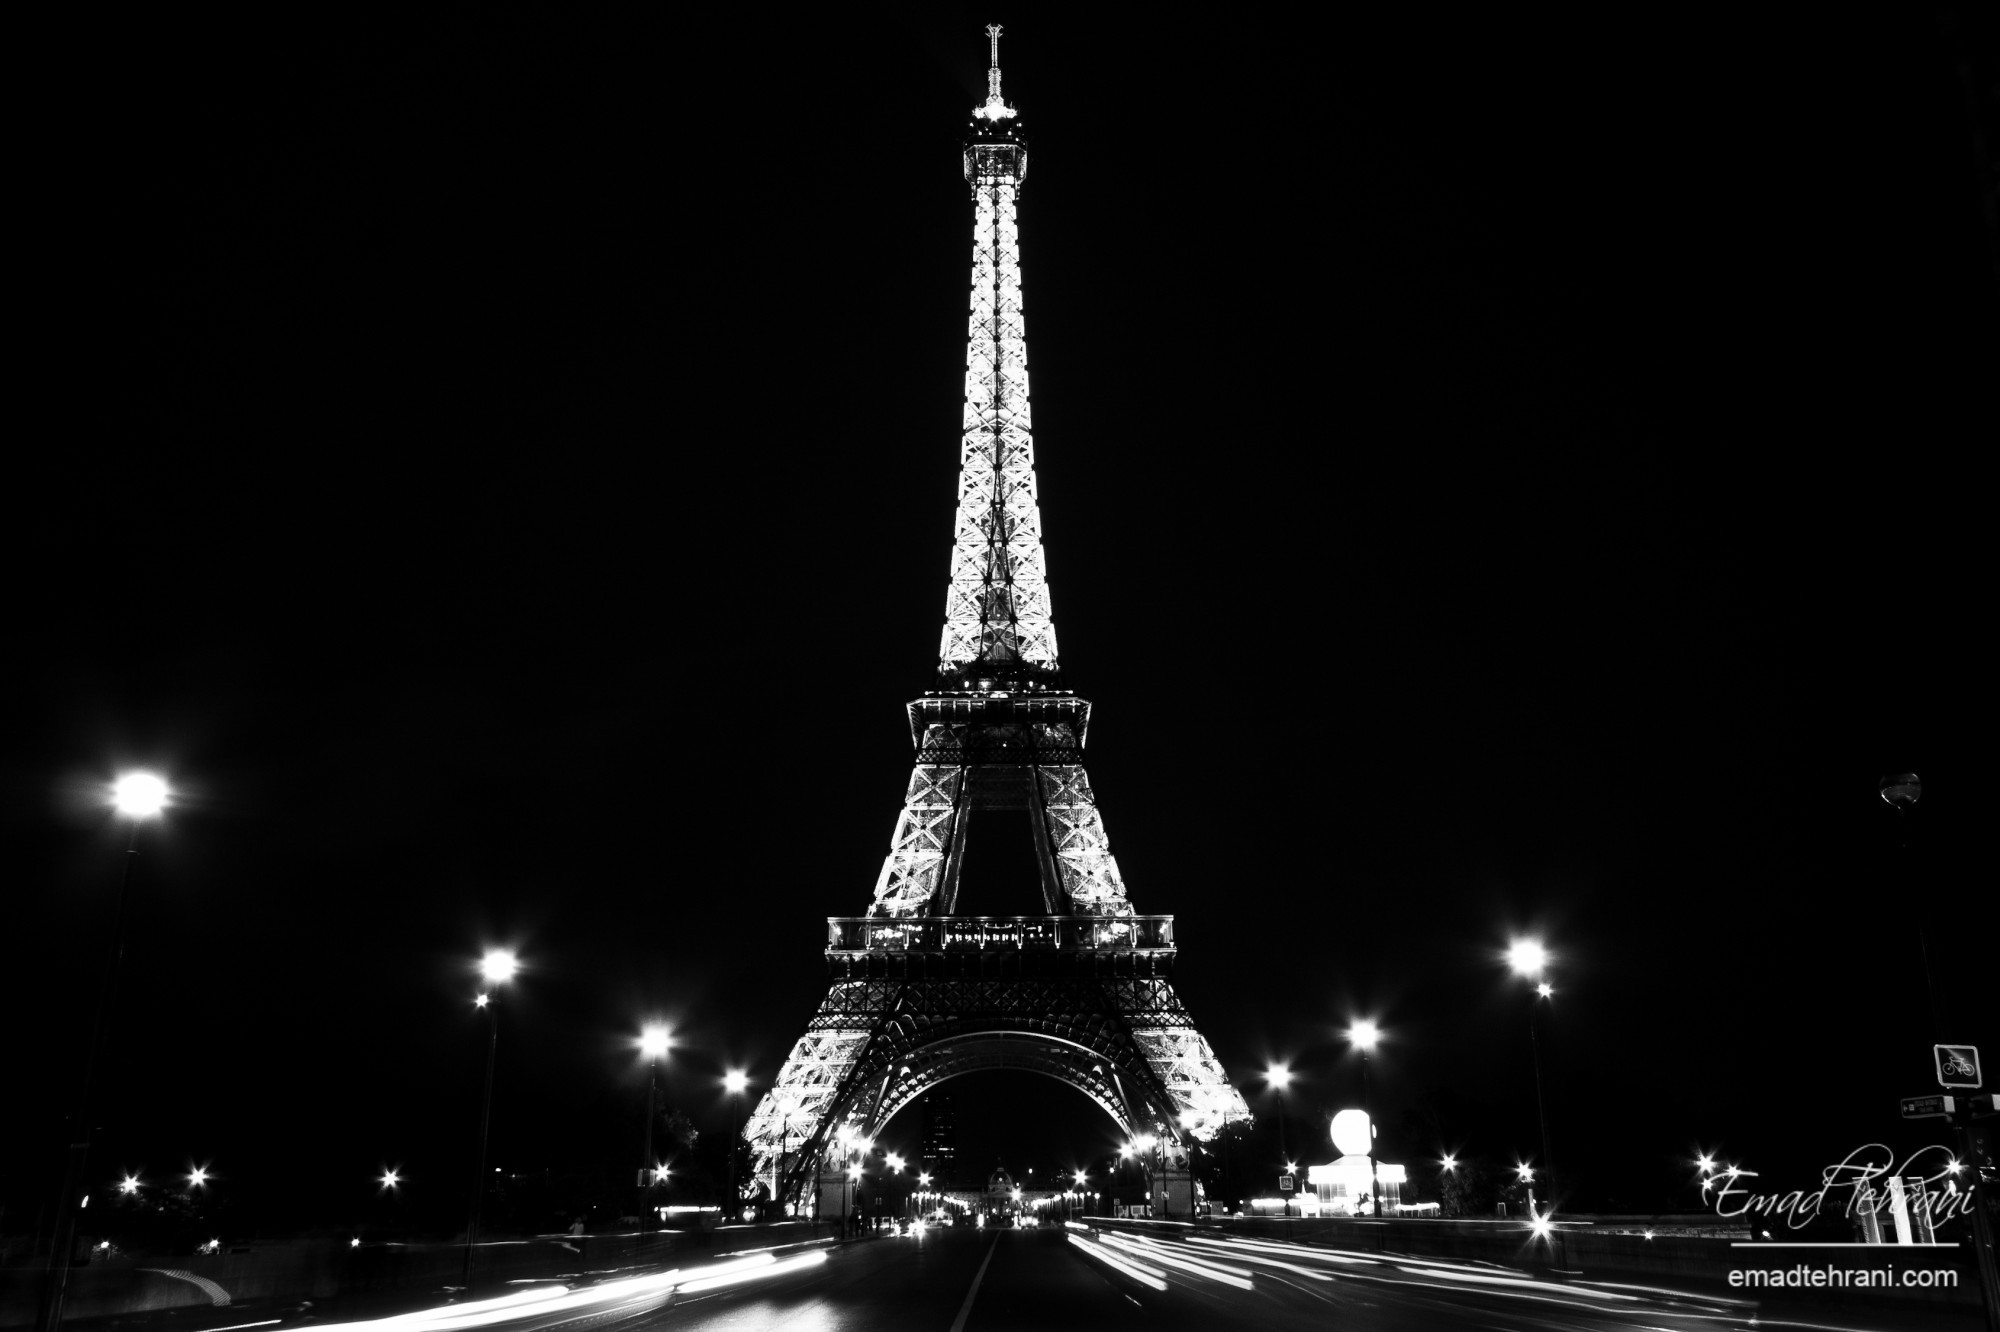 Night Lights Of Paris And The Eiffel Tower Wallpaper Image